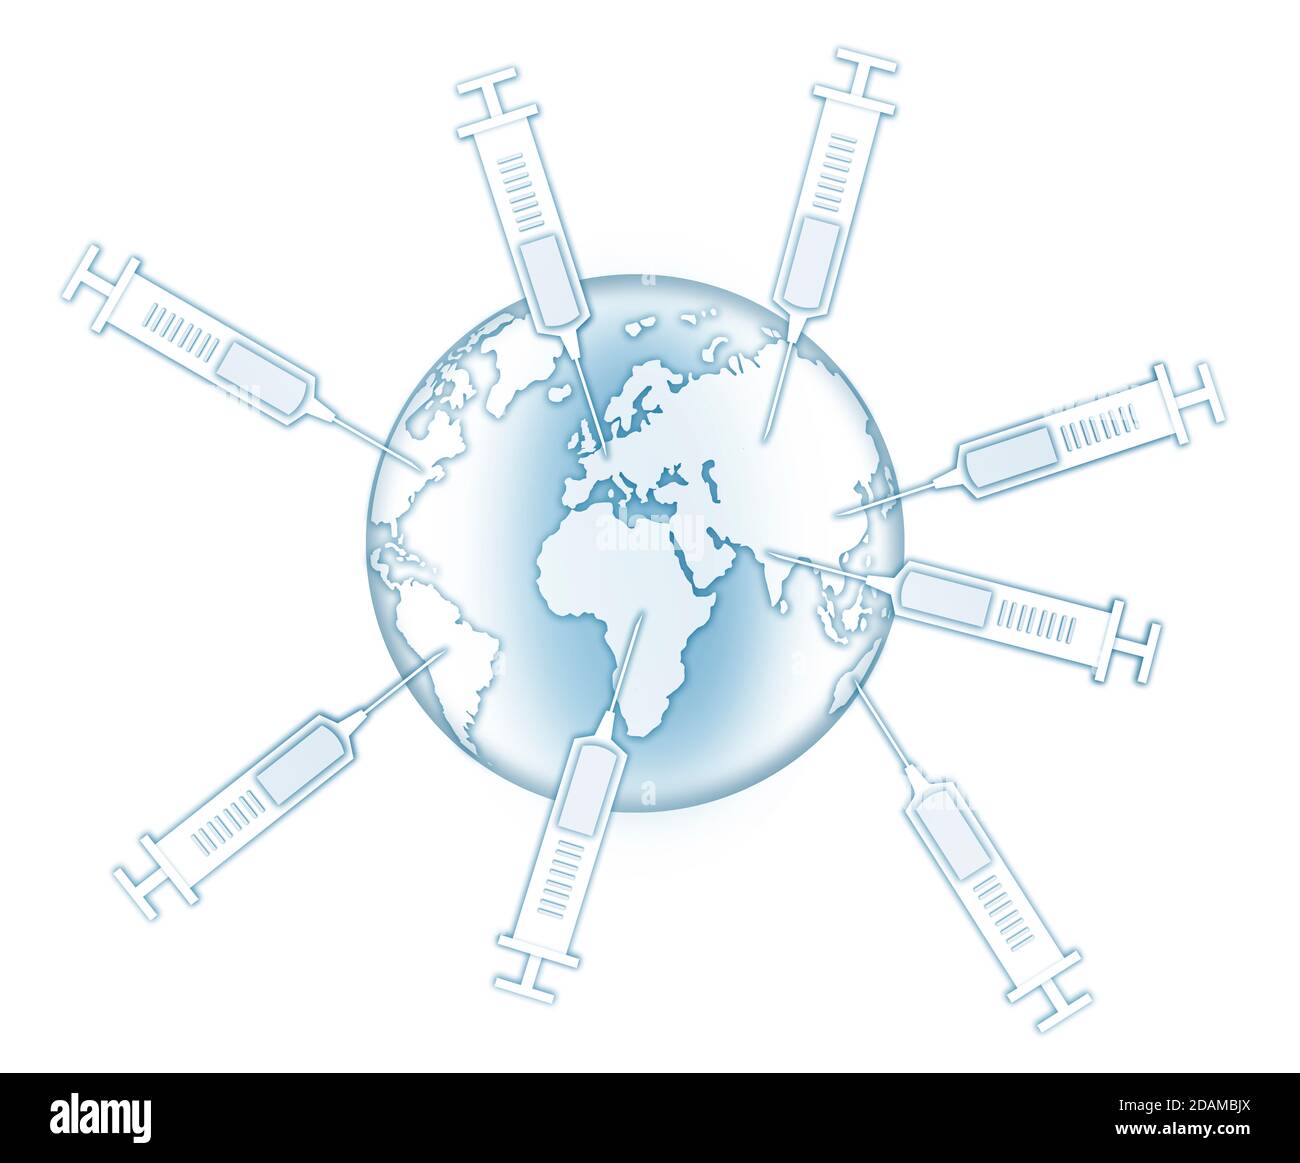 Earth being injected with syringes, illustration. Stock Photo